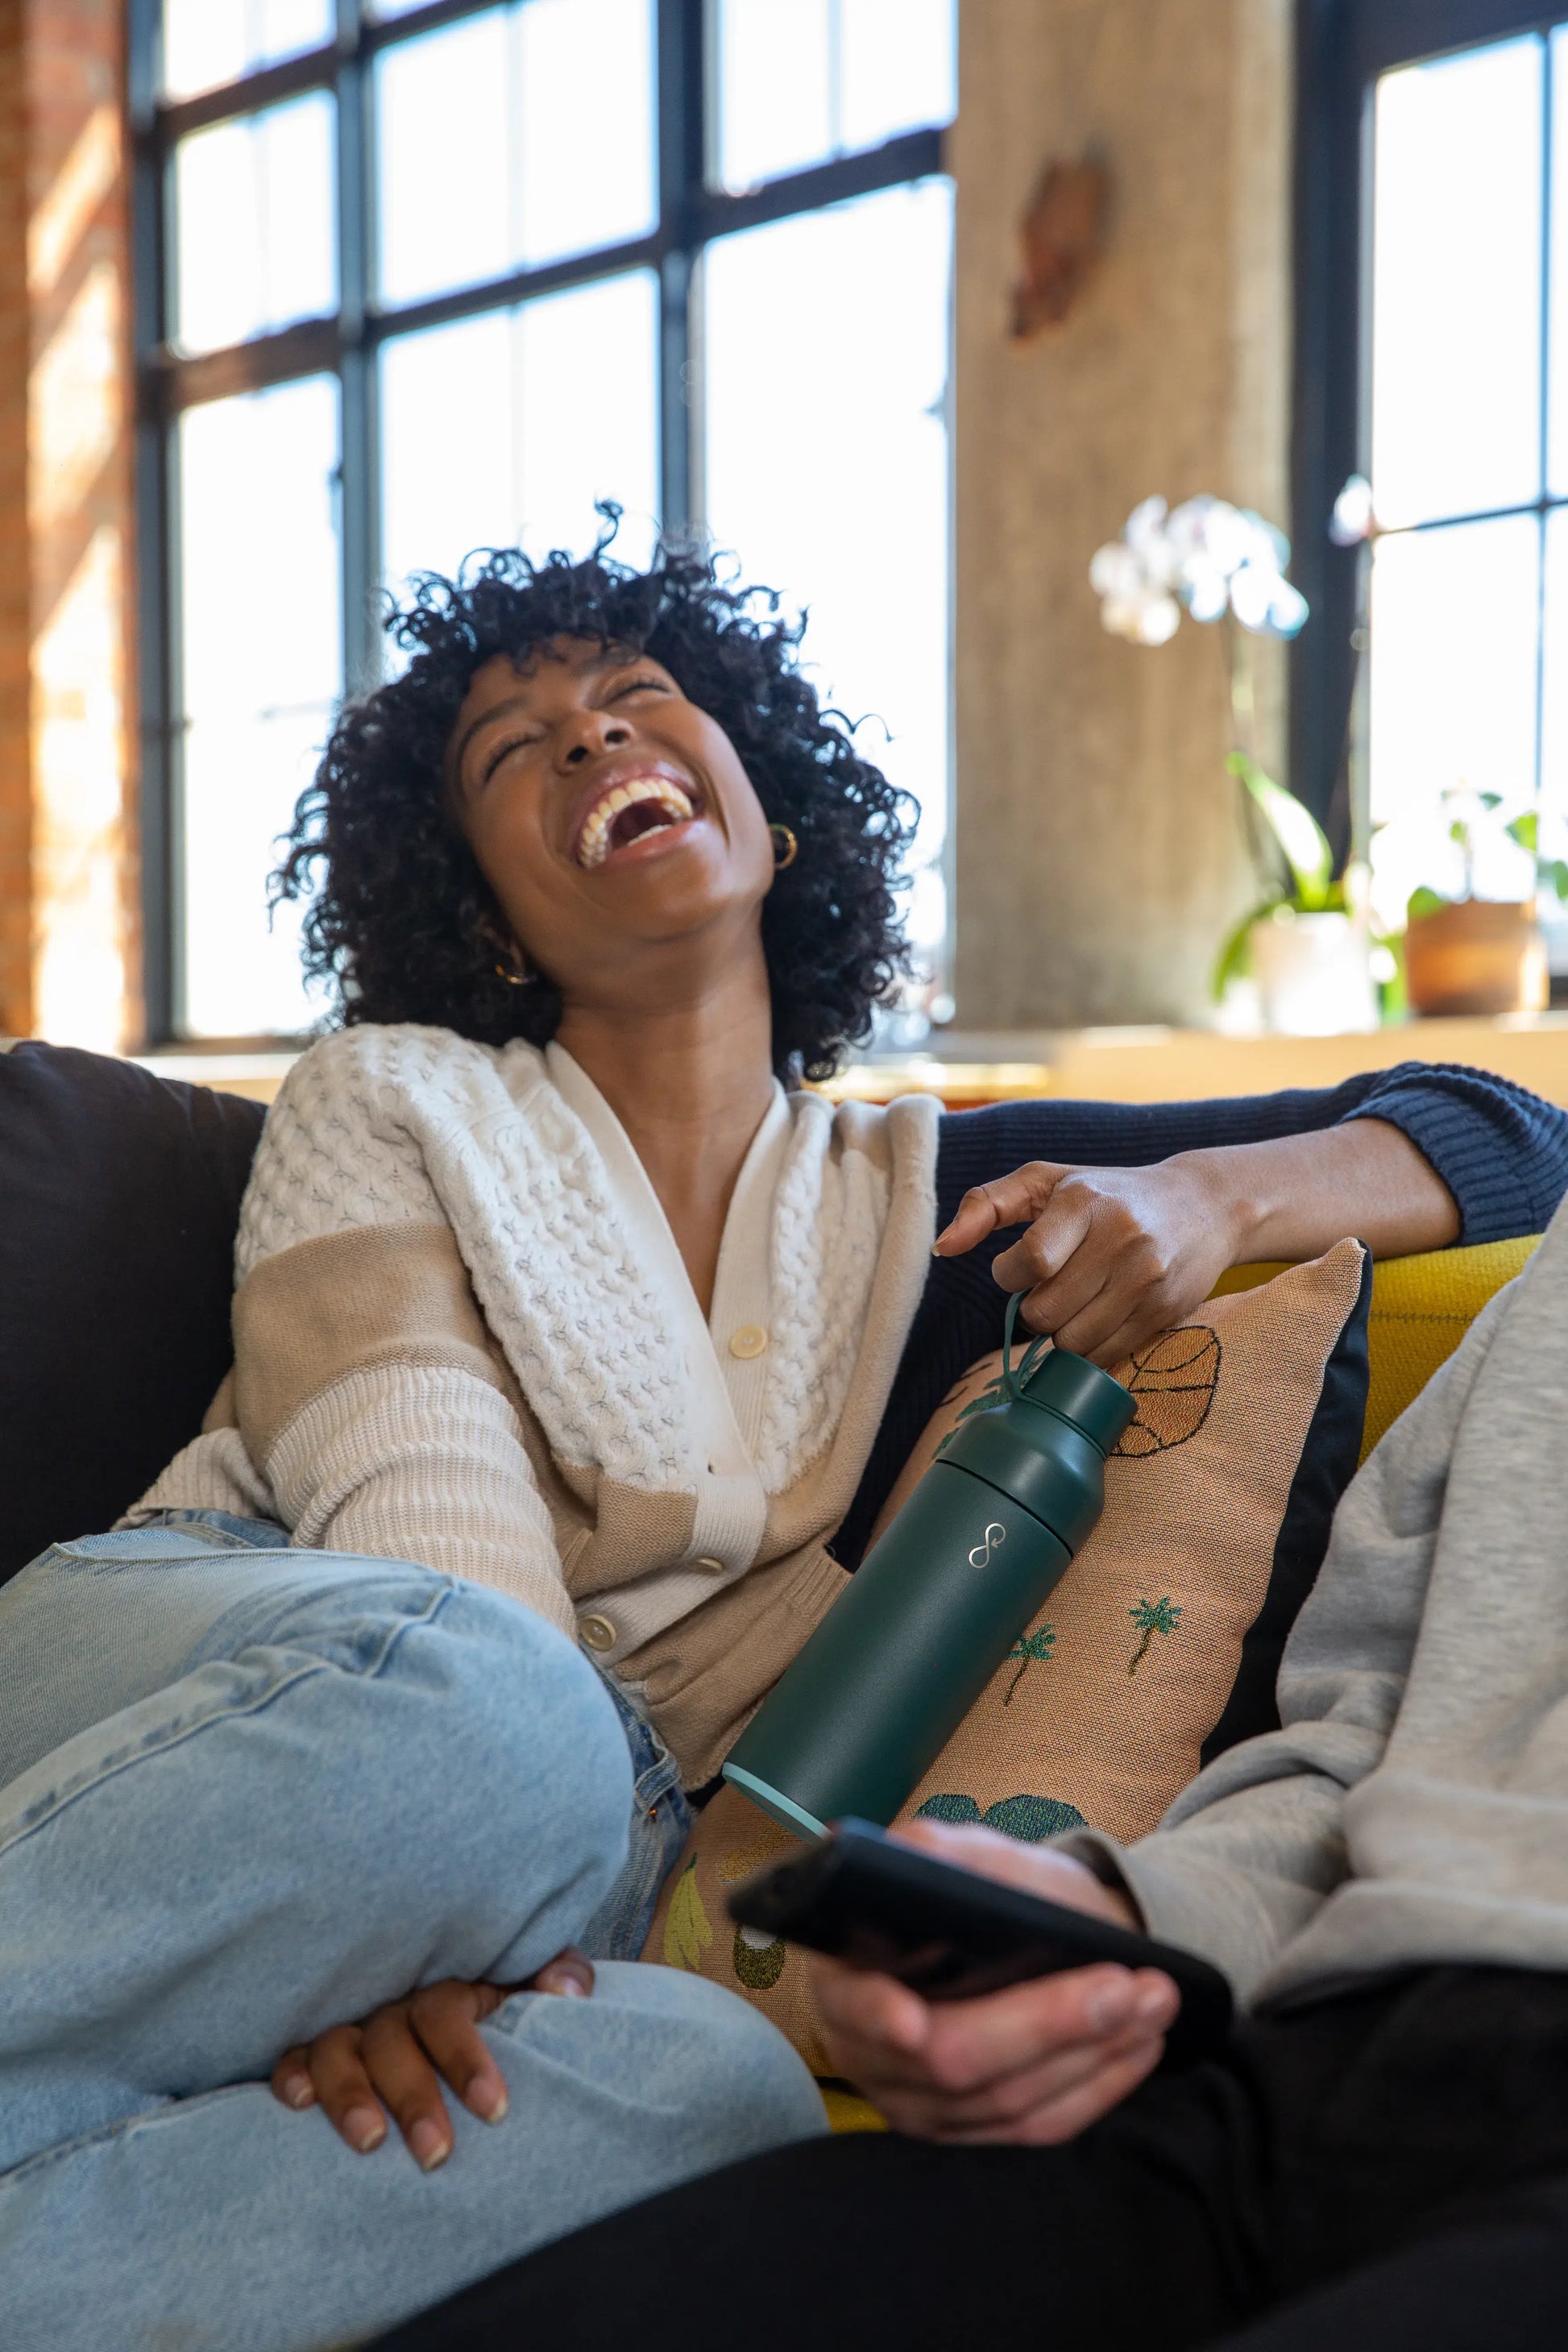 Woman laughing on a couch holding a green water bottle.